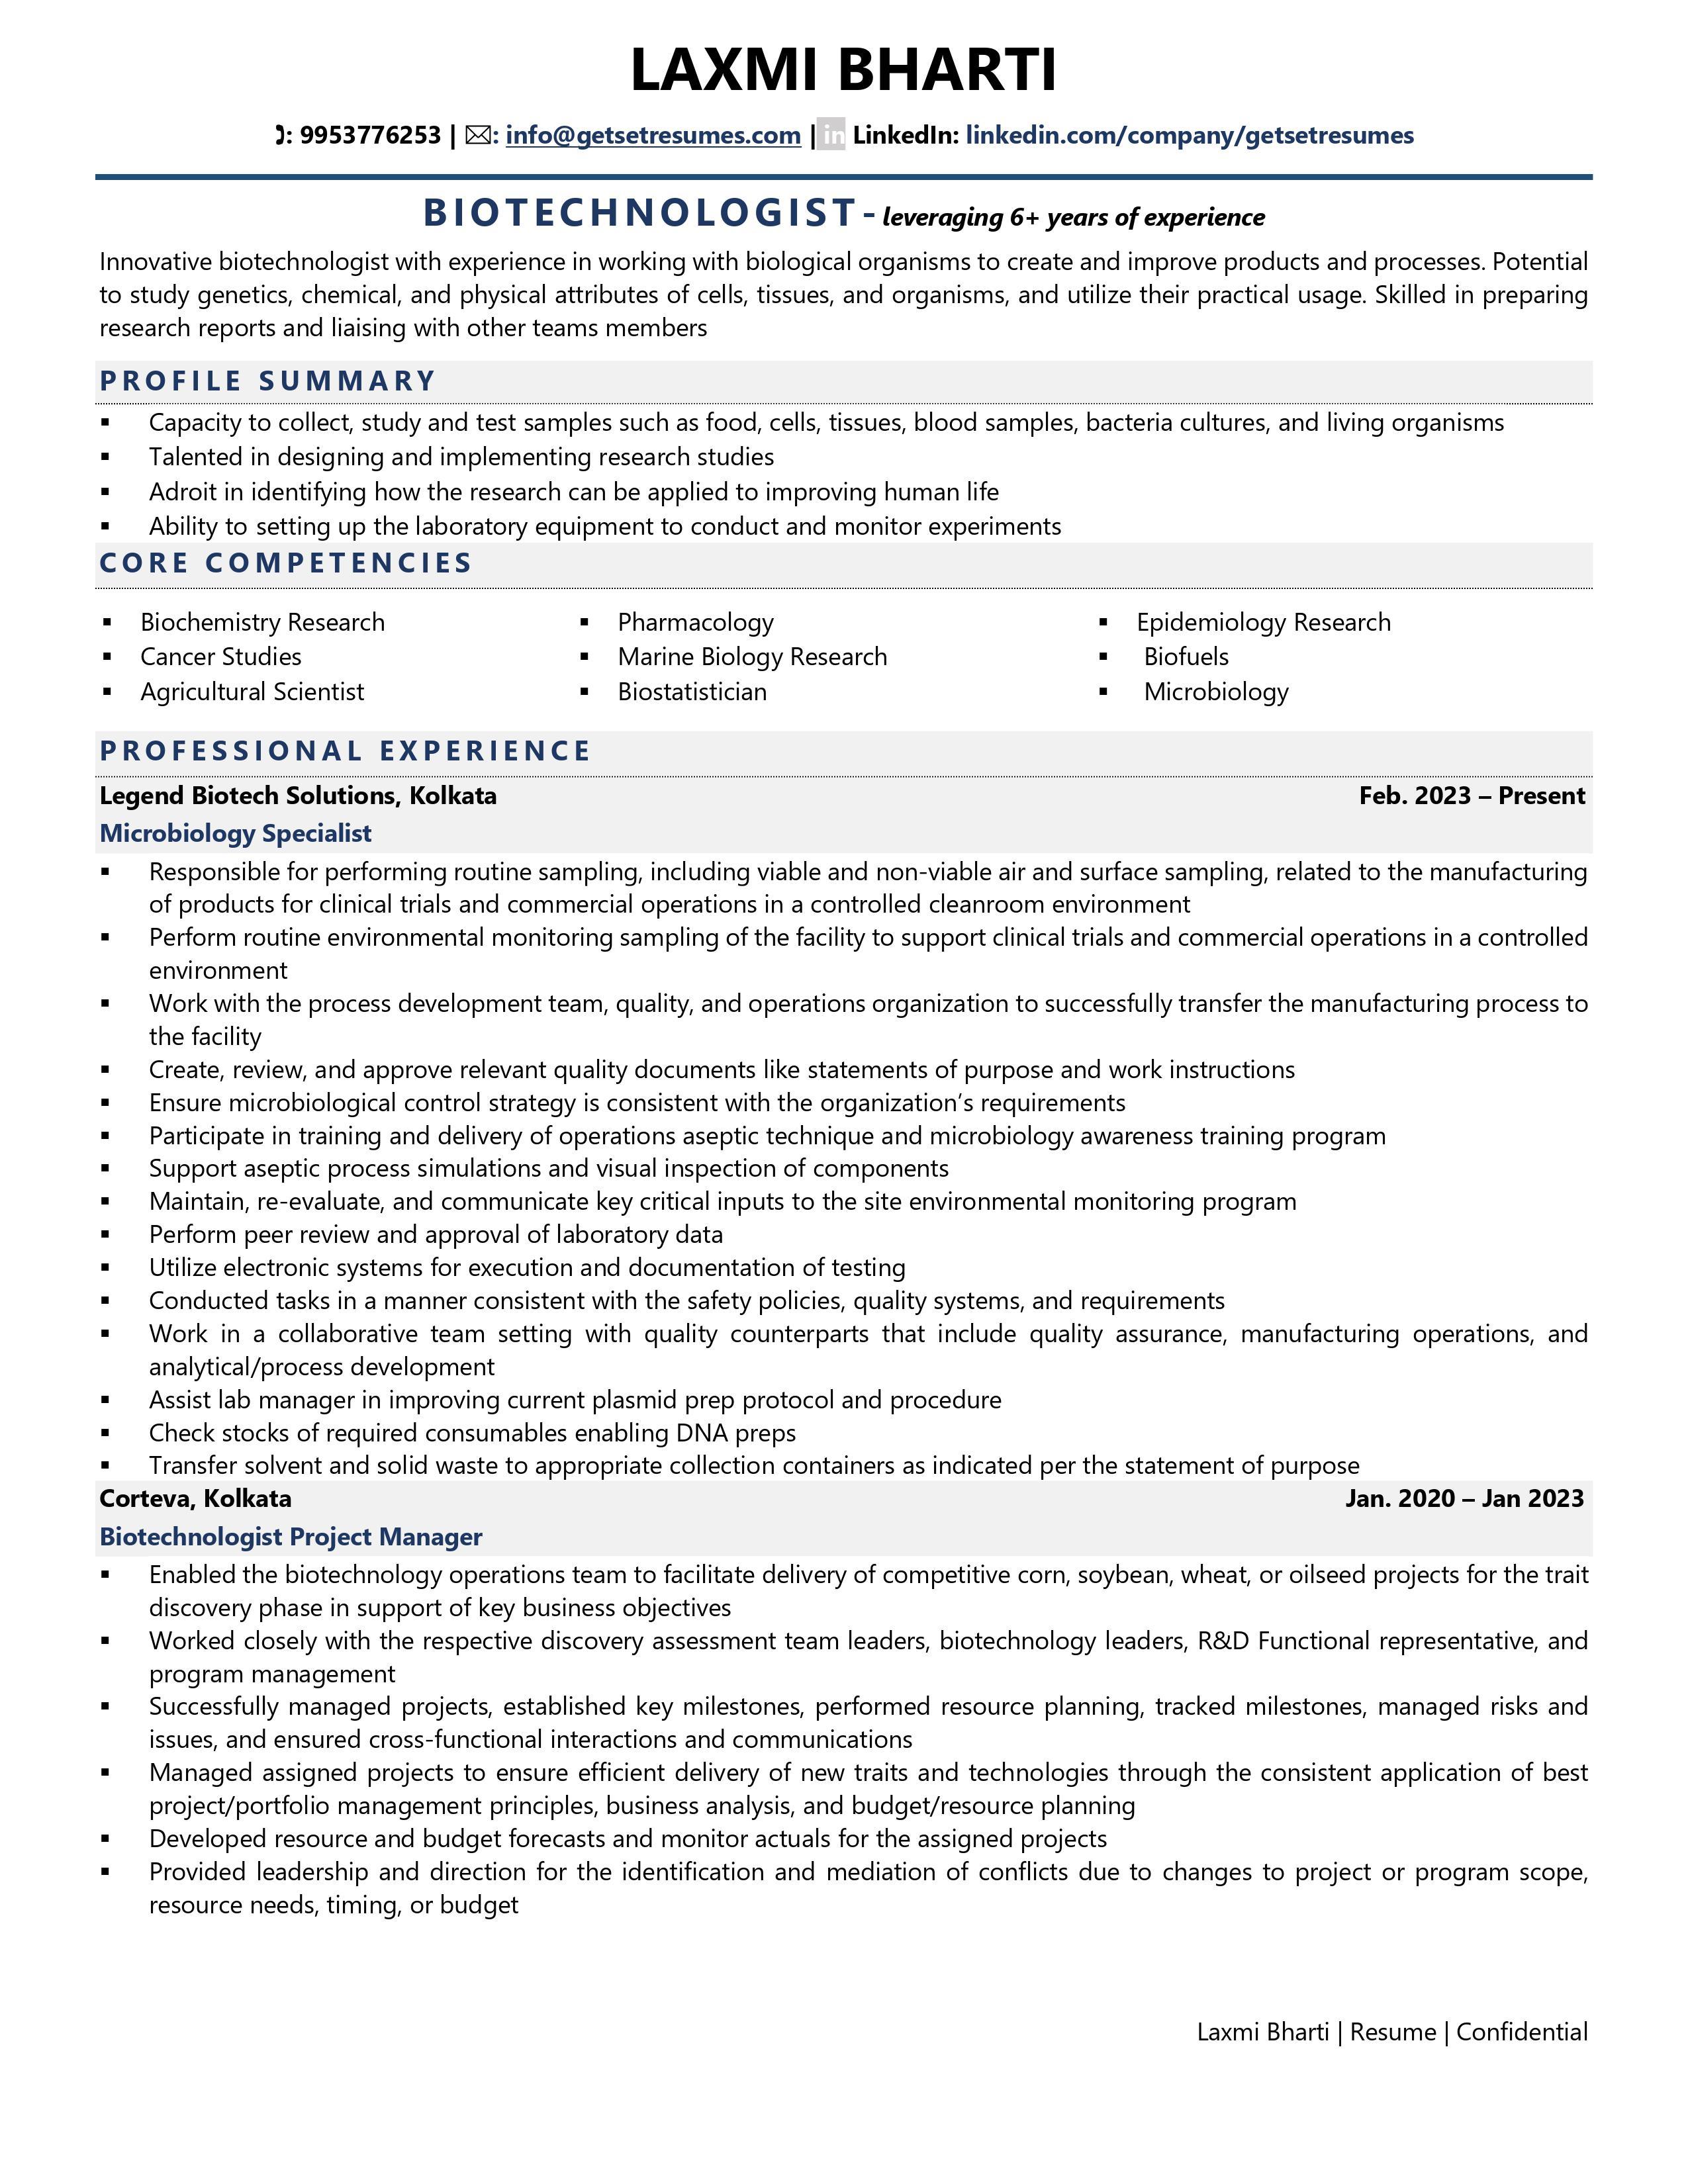 biotechnology fresher resume format download in ms word